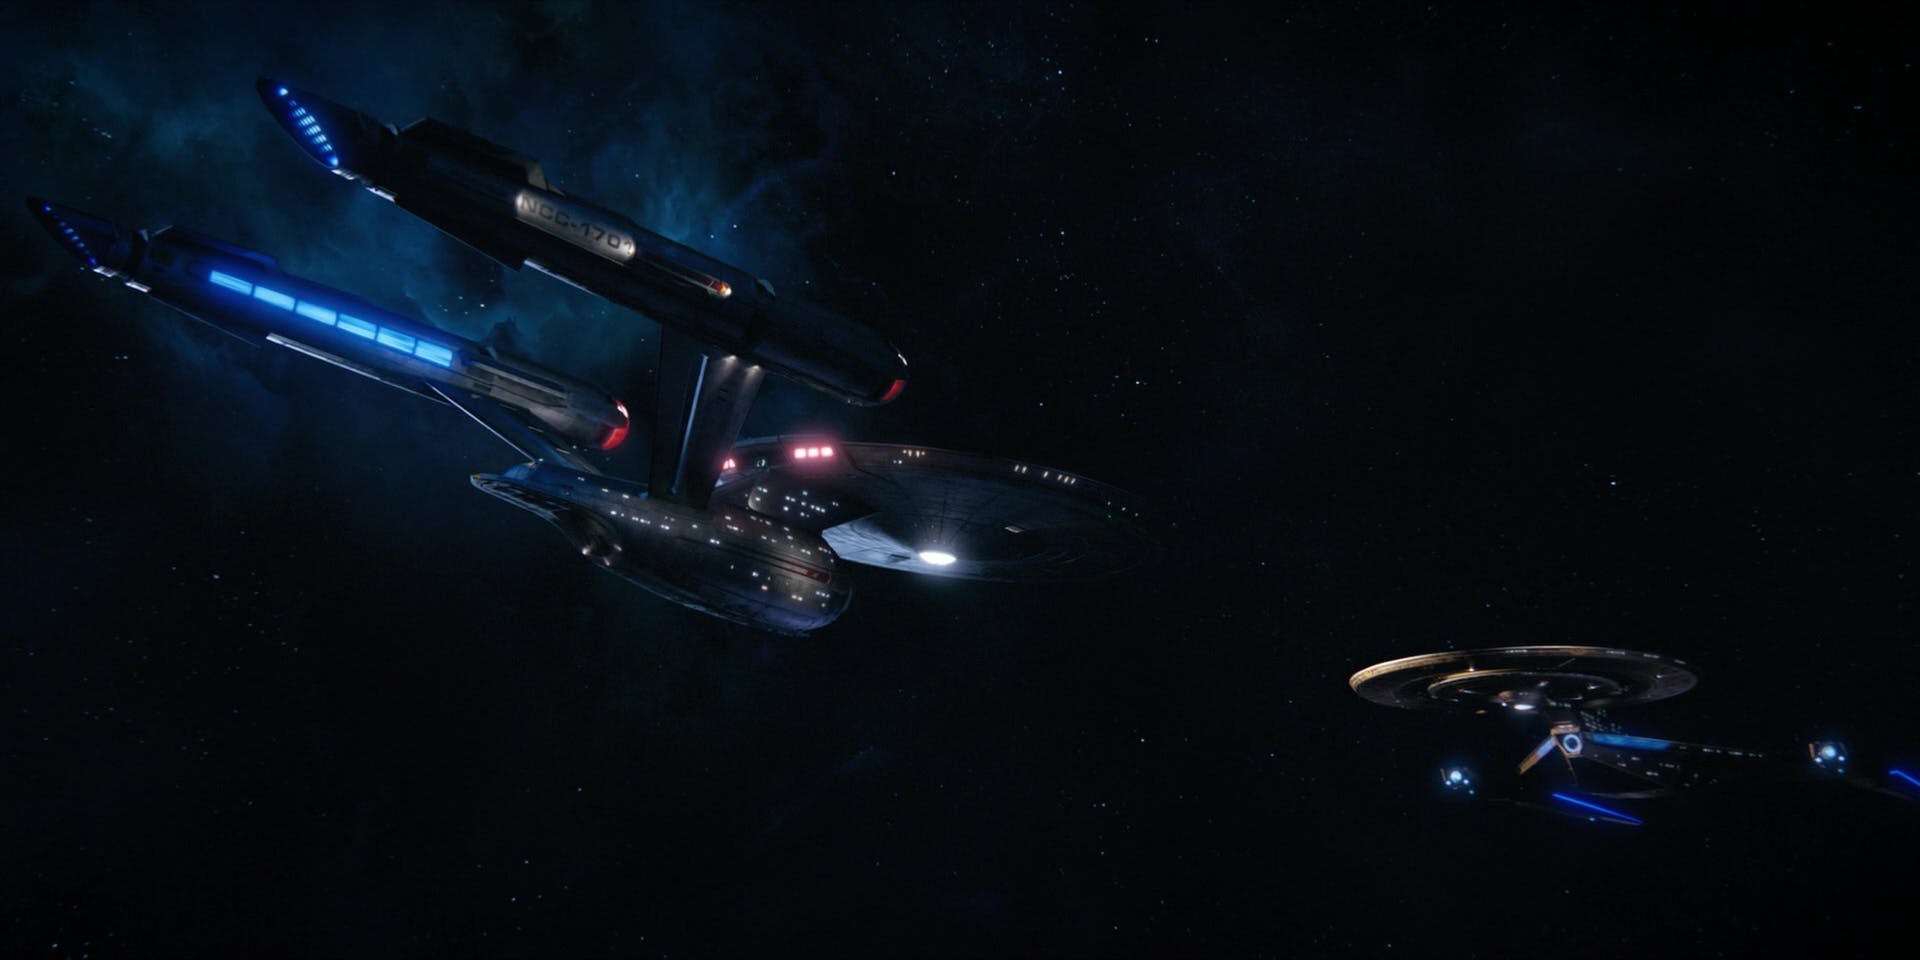 The U.S.S. Enterprise rendezvous with the U.S.S. Discovery in 'Will You Take My Hand?'